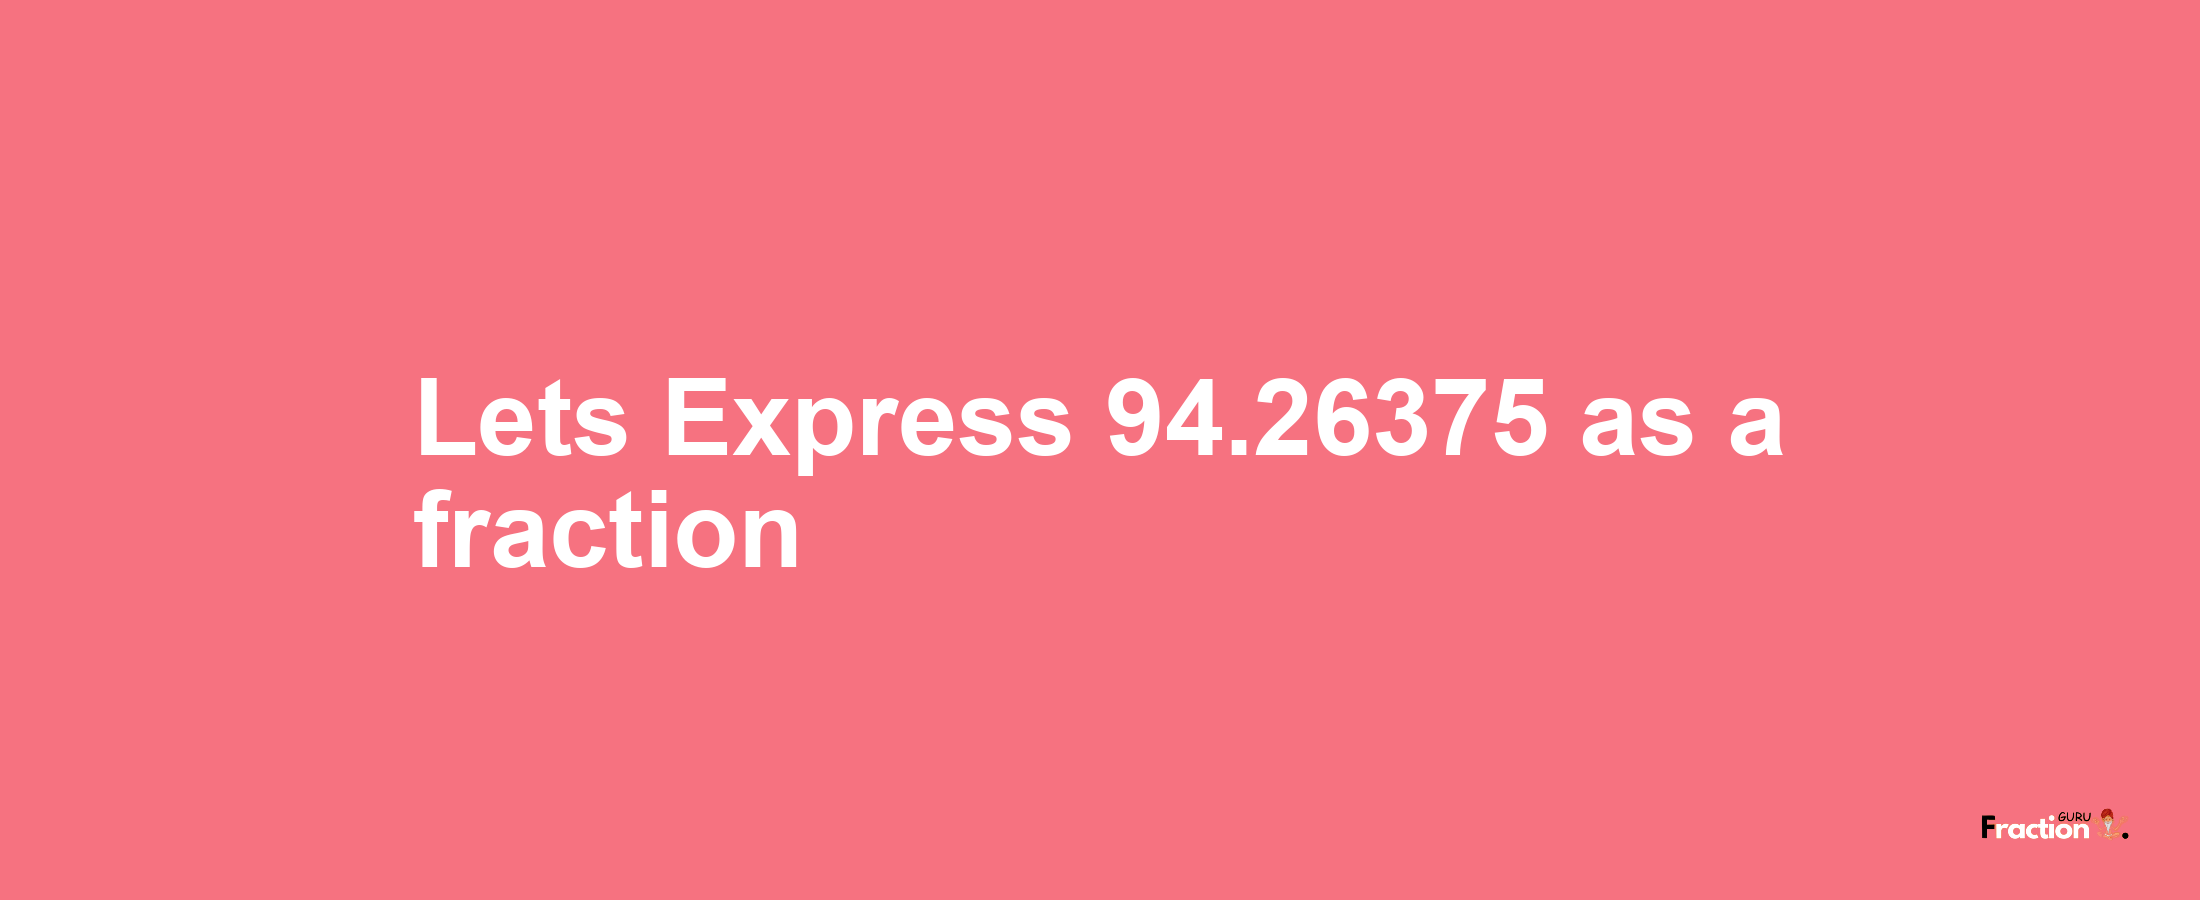 Lets Express 94.26375 as afraction